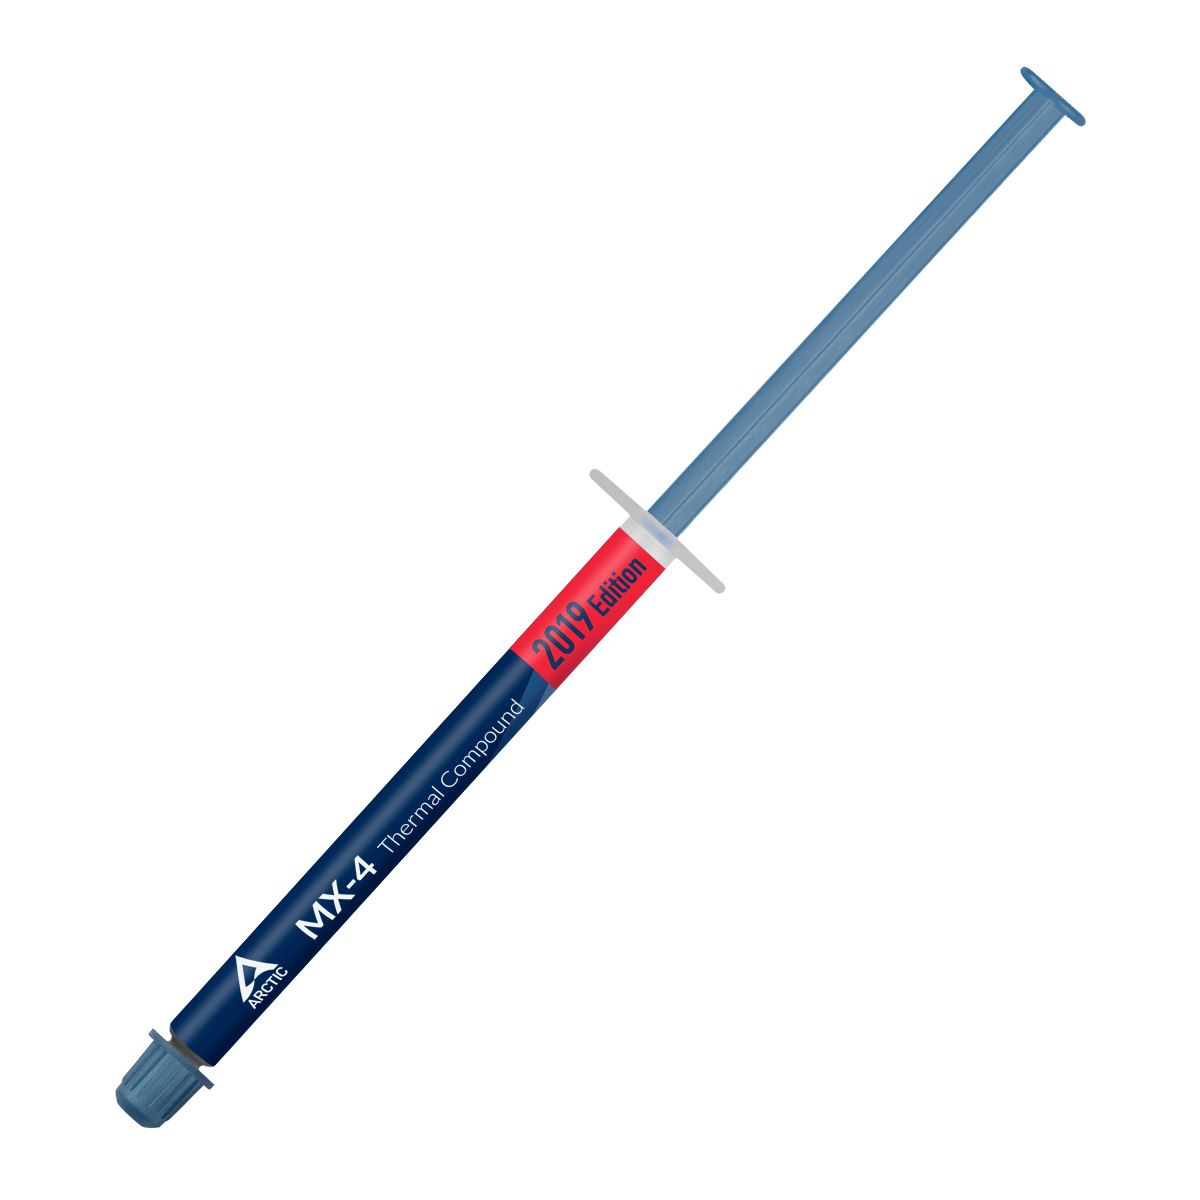 ARCTIC MX-4 2g - High Performance Thermal Compound